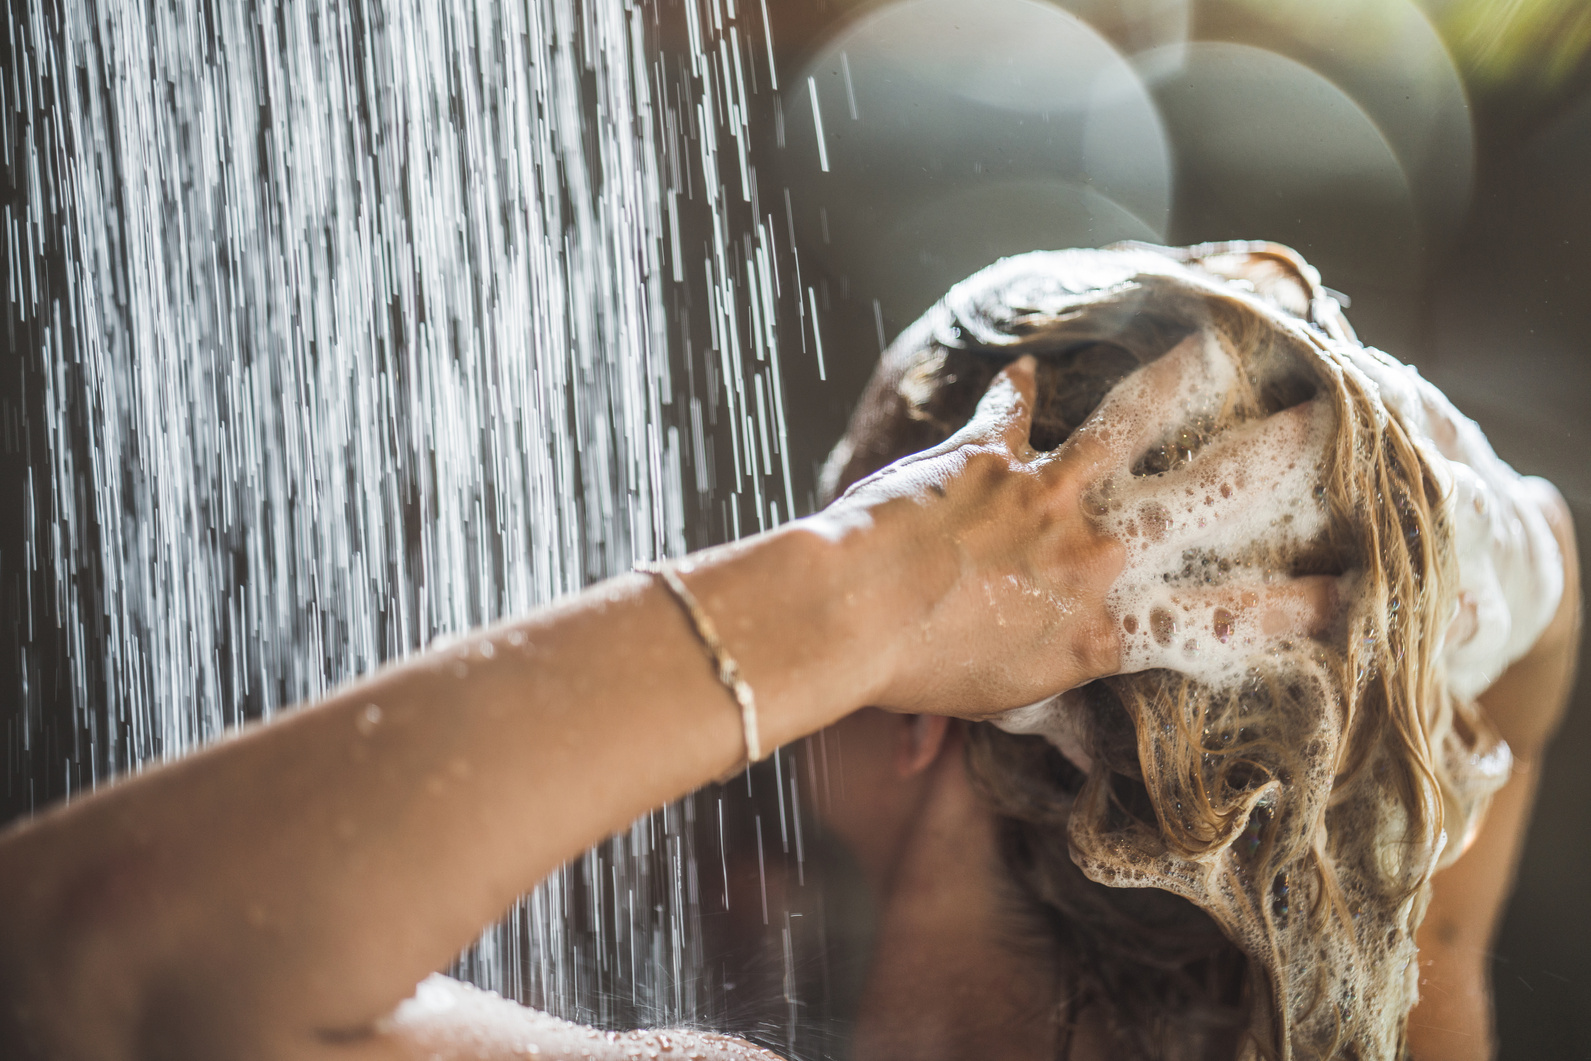 Woman washing her hair with shampoo under the shower.